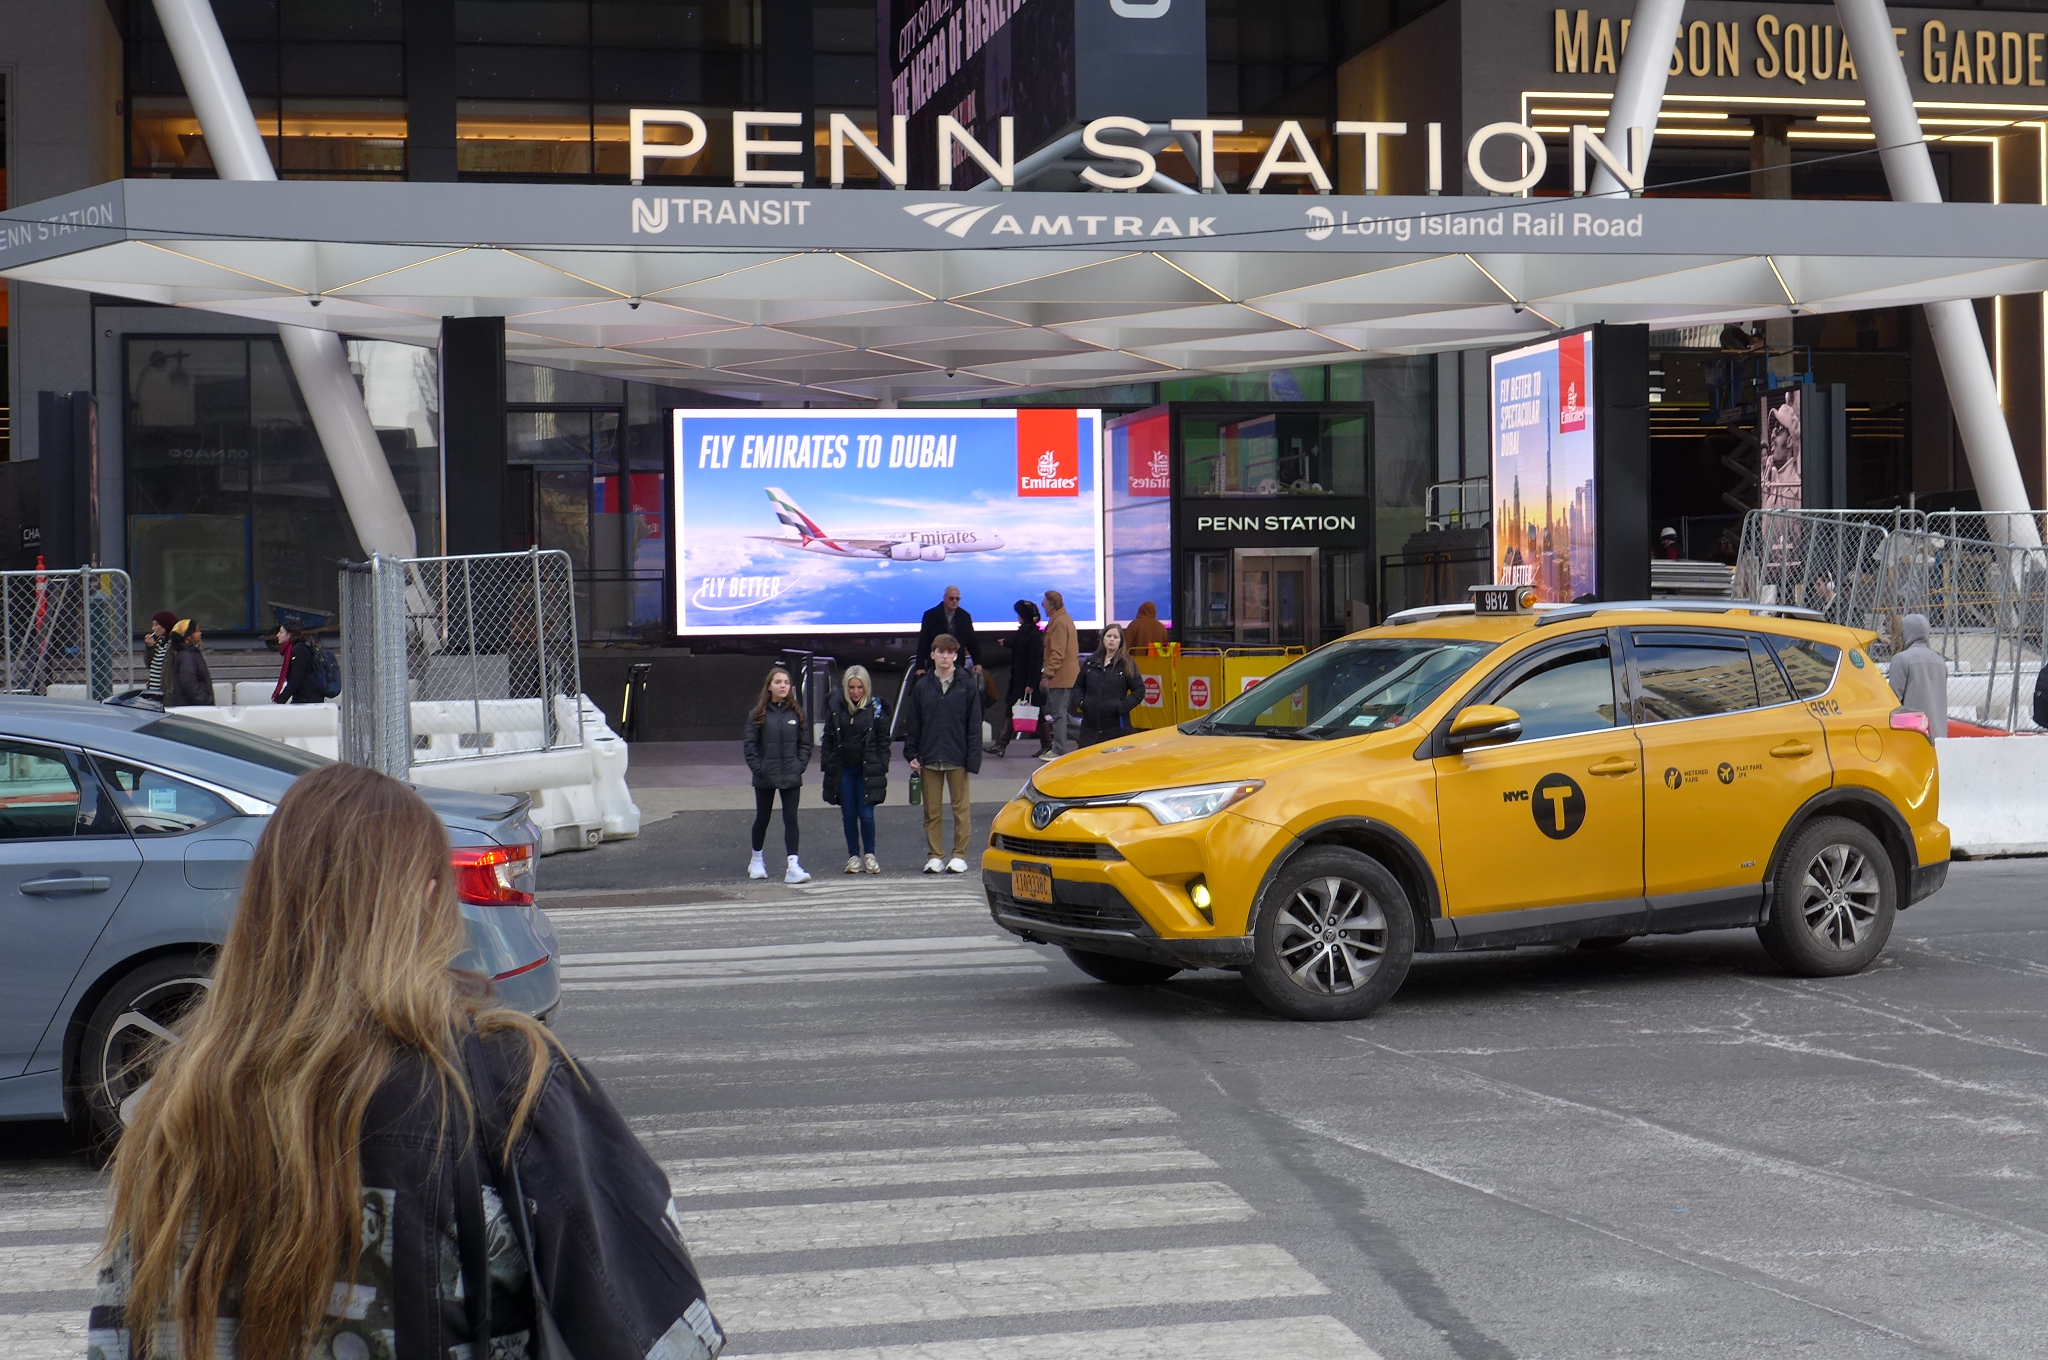 A yellow cab, a few pedestrians, and the 7th Avenue entrance to Penn Station.